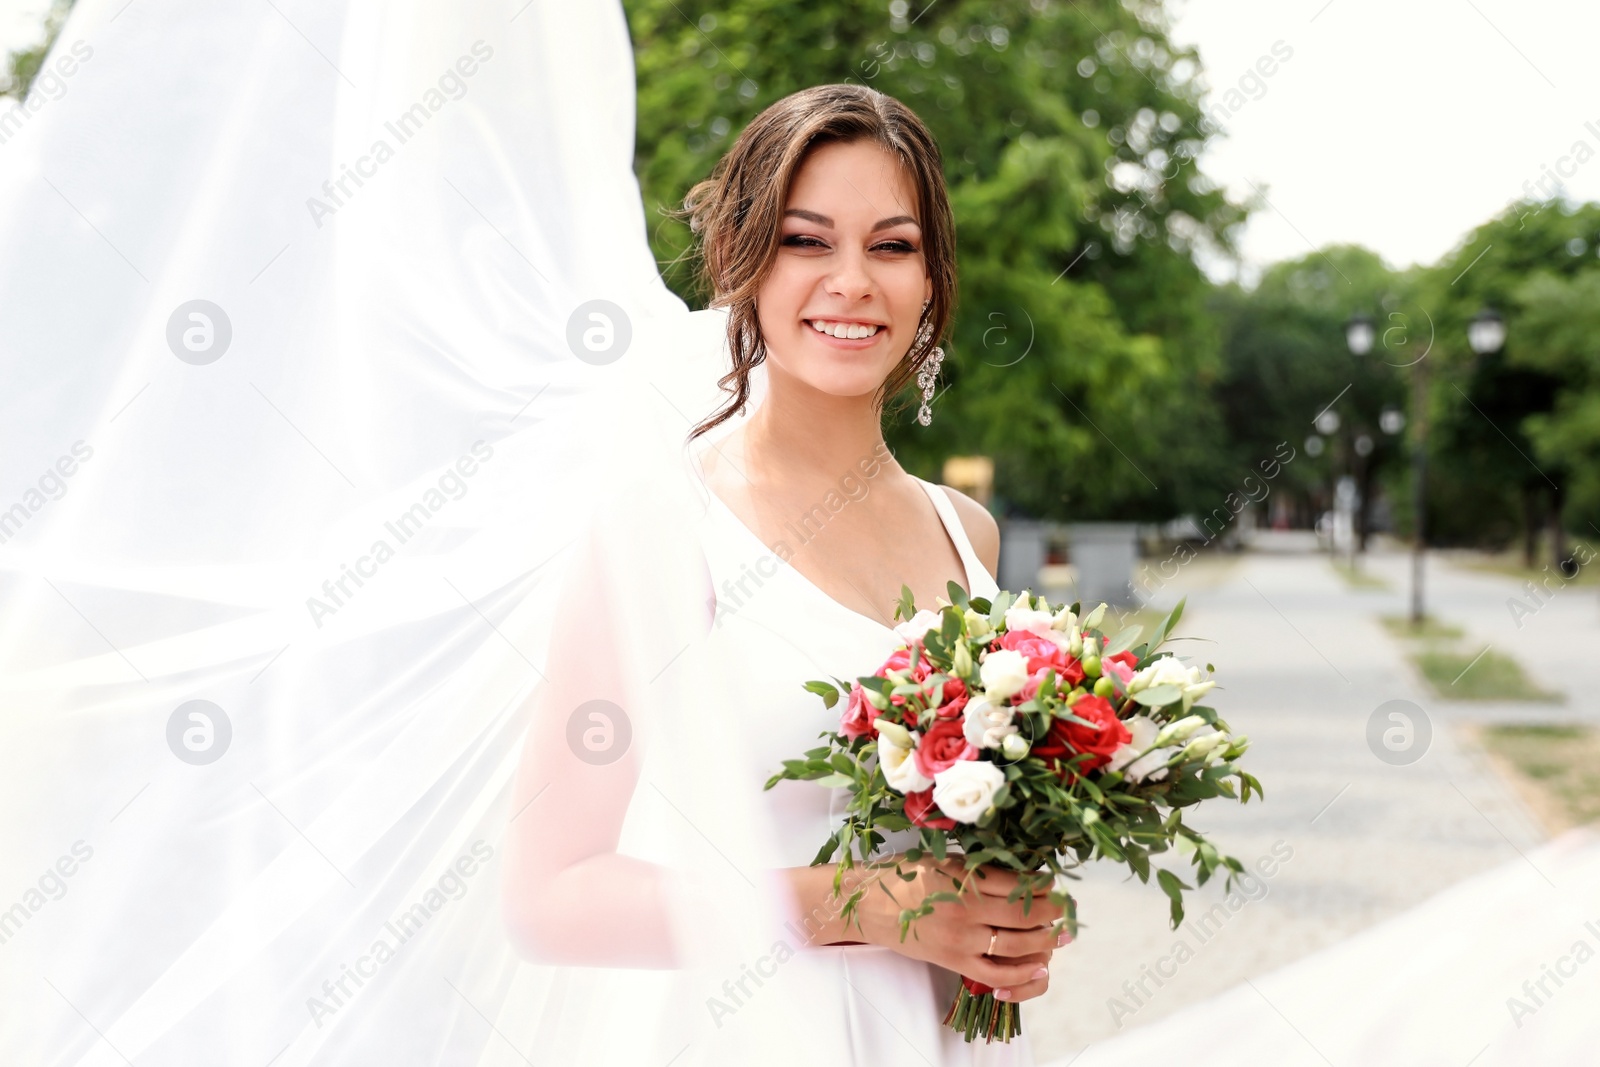 Photo of Young bride with bouquet in long veil outdoors